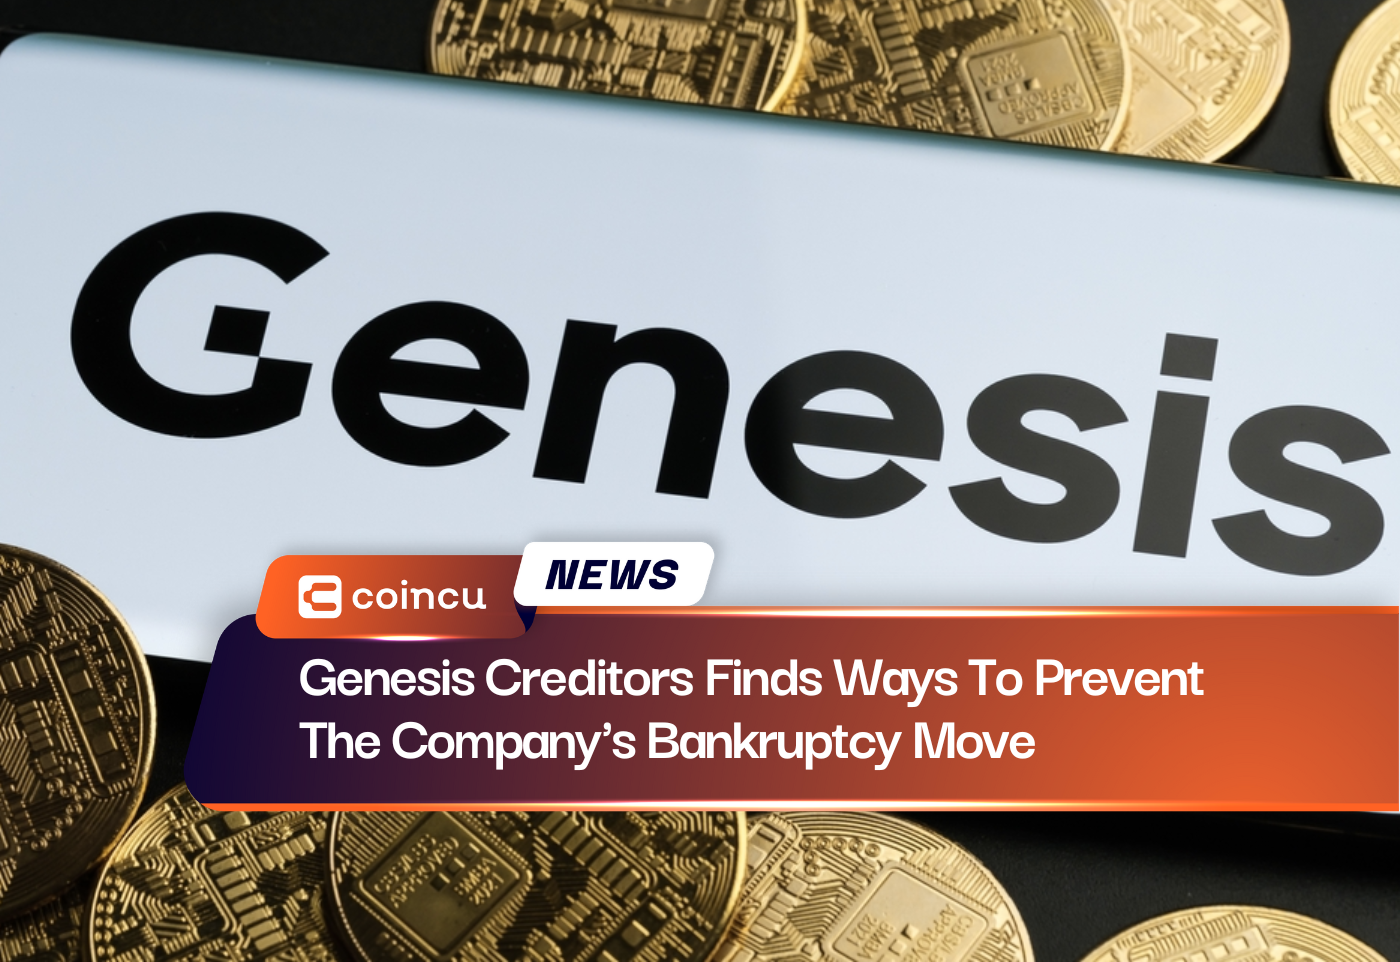 Genesis Creditors Finds Ways To Prevent The Company's Bankruptcy Move